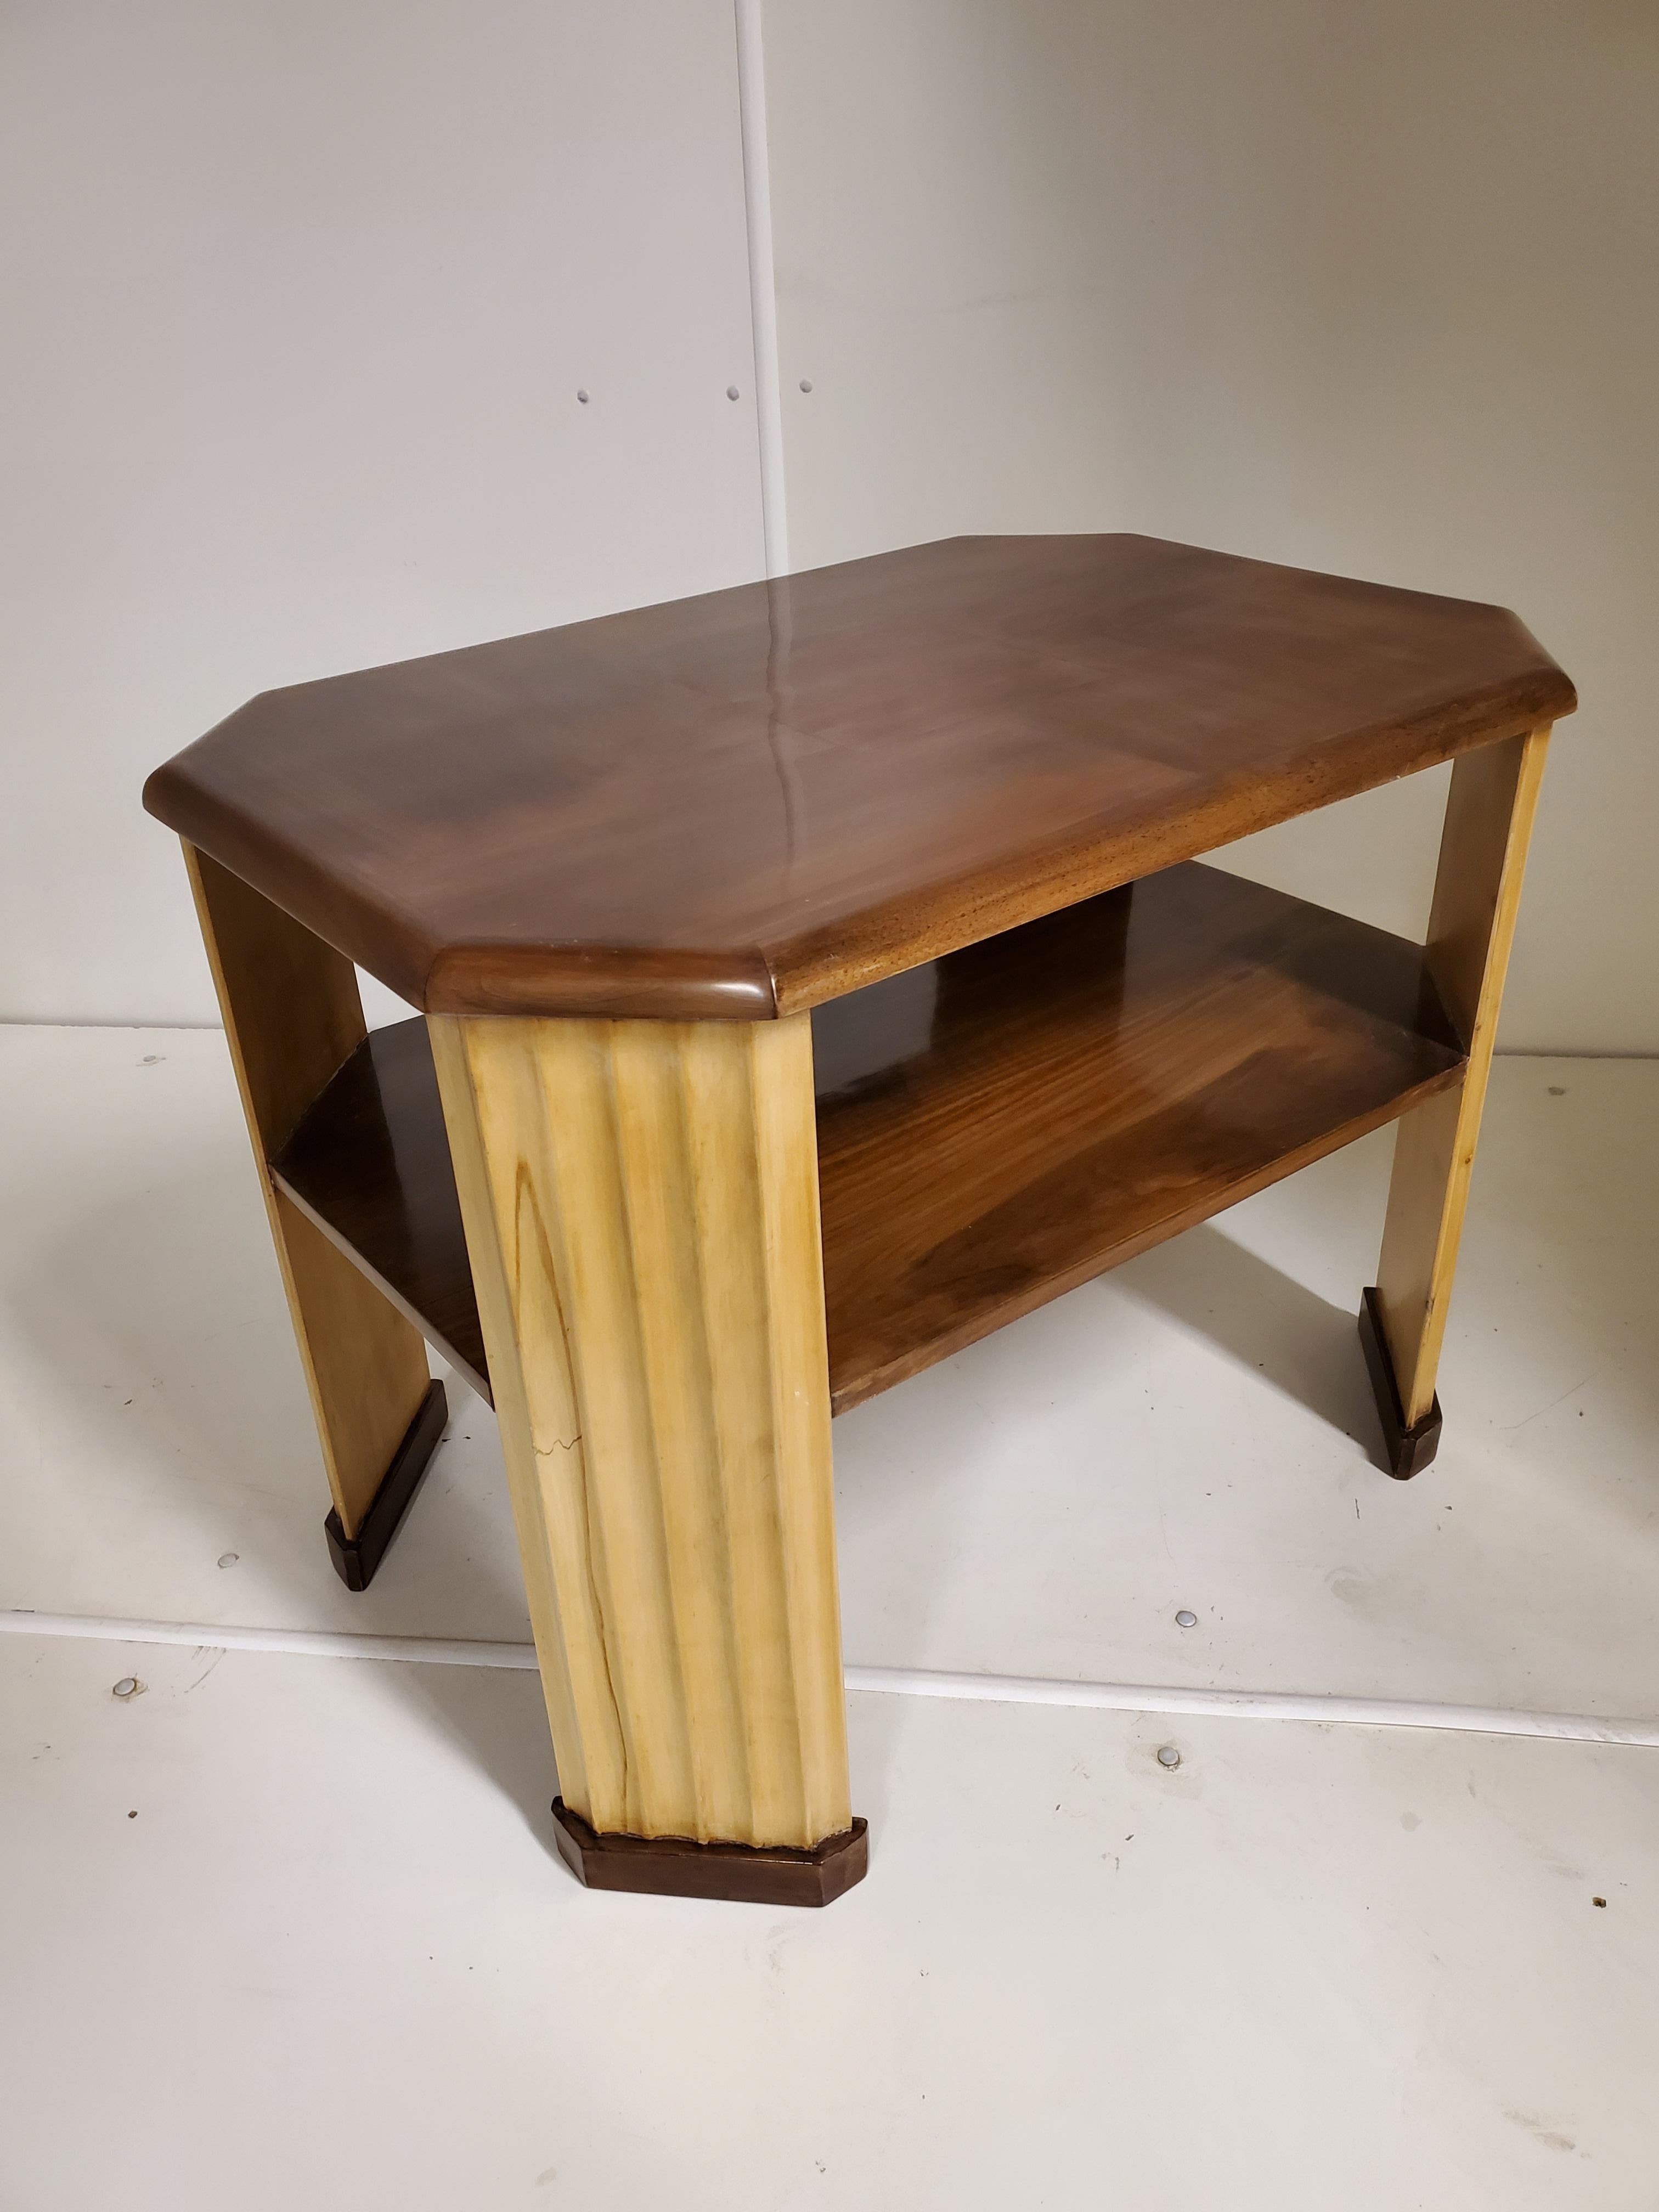 Original French Rectangular or Octagonal Walnut and Sycamore Side Table For Sale 8